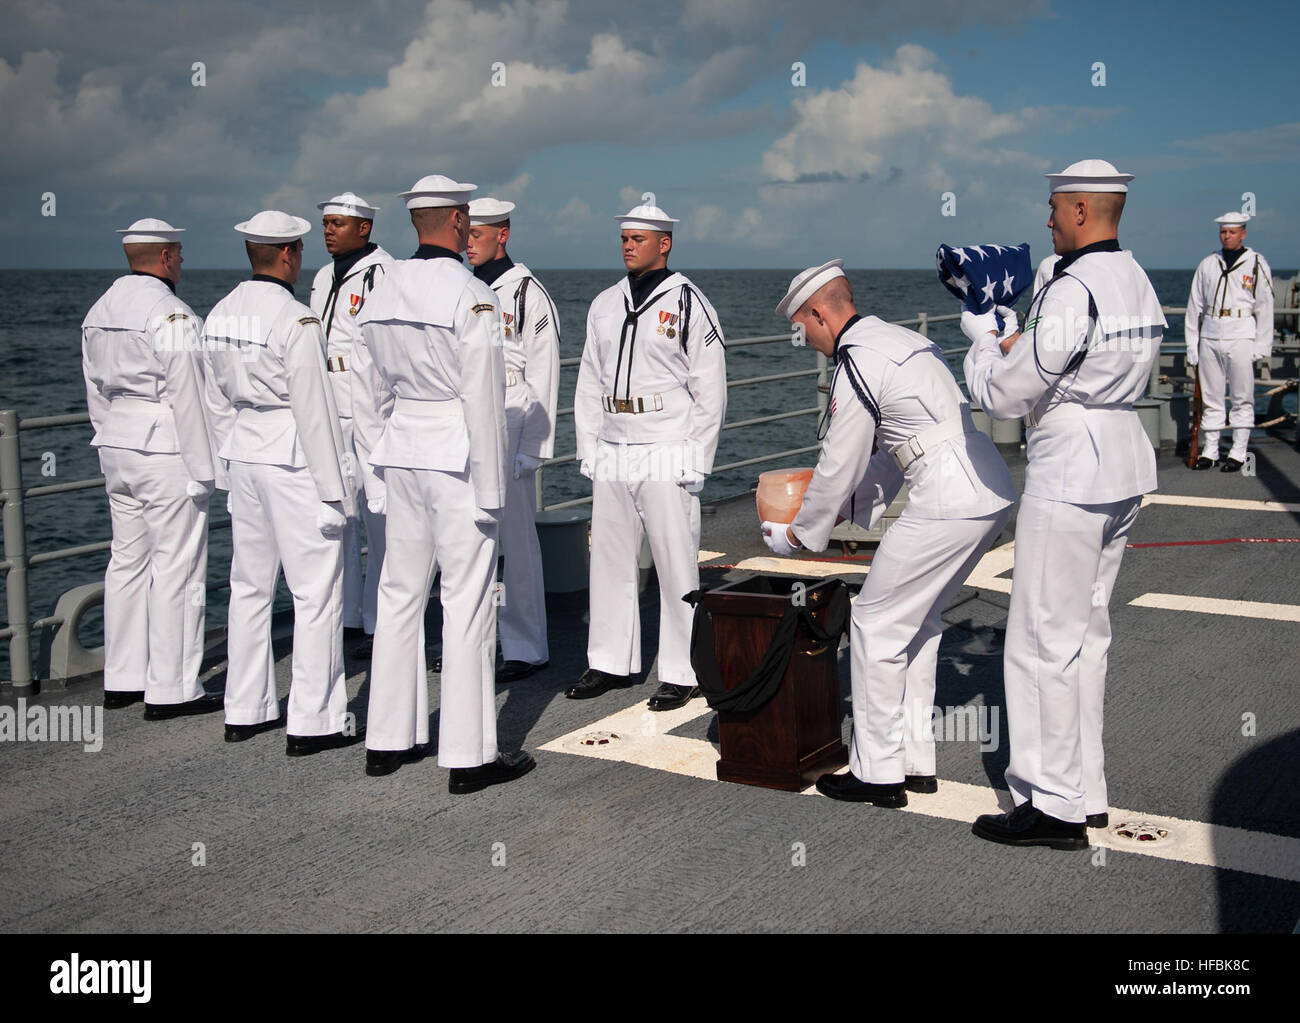 ATLANTIC OCEAN (Sept. 14, 2012)  Sailors carry the cremains of Apollo 11 astronaut Neil Armstrong during a burial at sea service aboard the guided-missile cruiser USS Philippine Sea (CG 58) in the Atlantic Ocean. Armstrong, the first man to walk on the moon during the 1969 Apollo 11 mission, died Saturday, Aug. 25. He was 82. (U.S. Navy photo courtesy of NASA by Bill Ingalls/Released) 120914-O-ZZ999-102 Join the conversation www.facebook.com/USNavy www.twitter.com/USNavy navylive.dodlive.mil  - Official U.S. Navy Imagery - Neil Armstrong buried at sea aboard USS Philippine Sea. Stock Photo